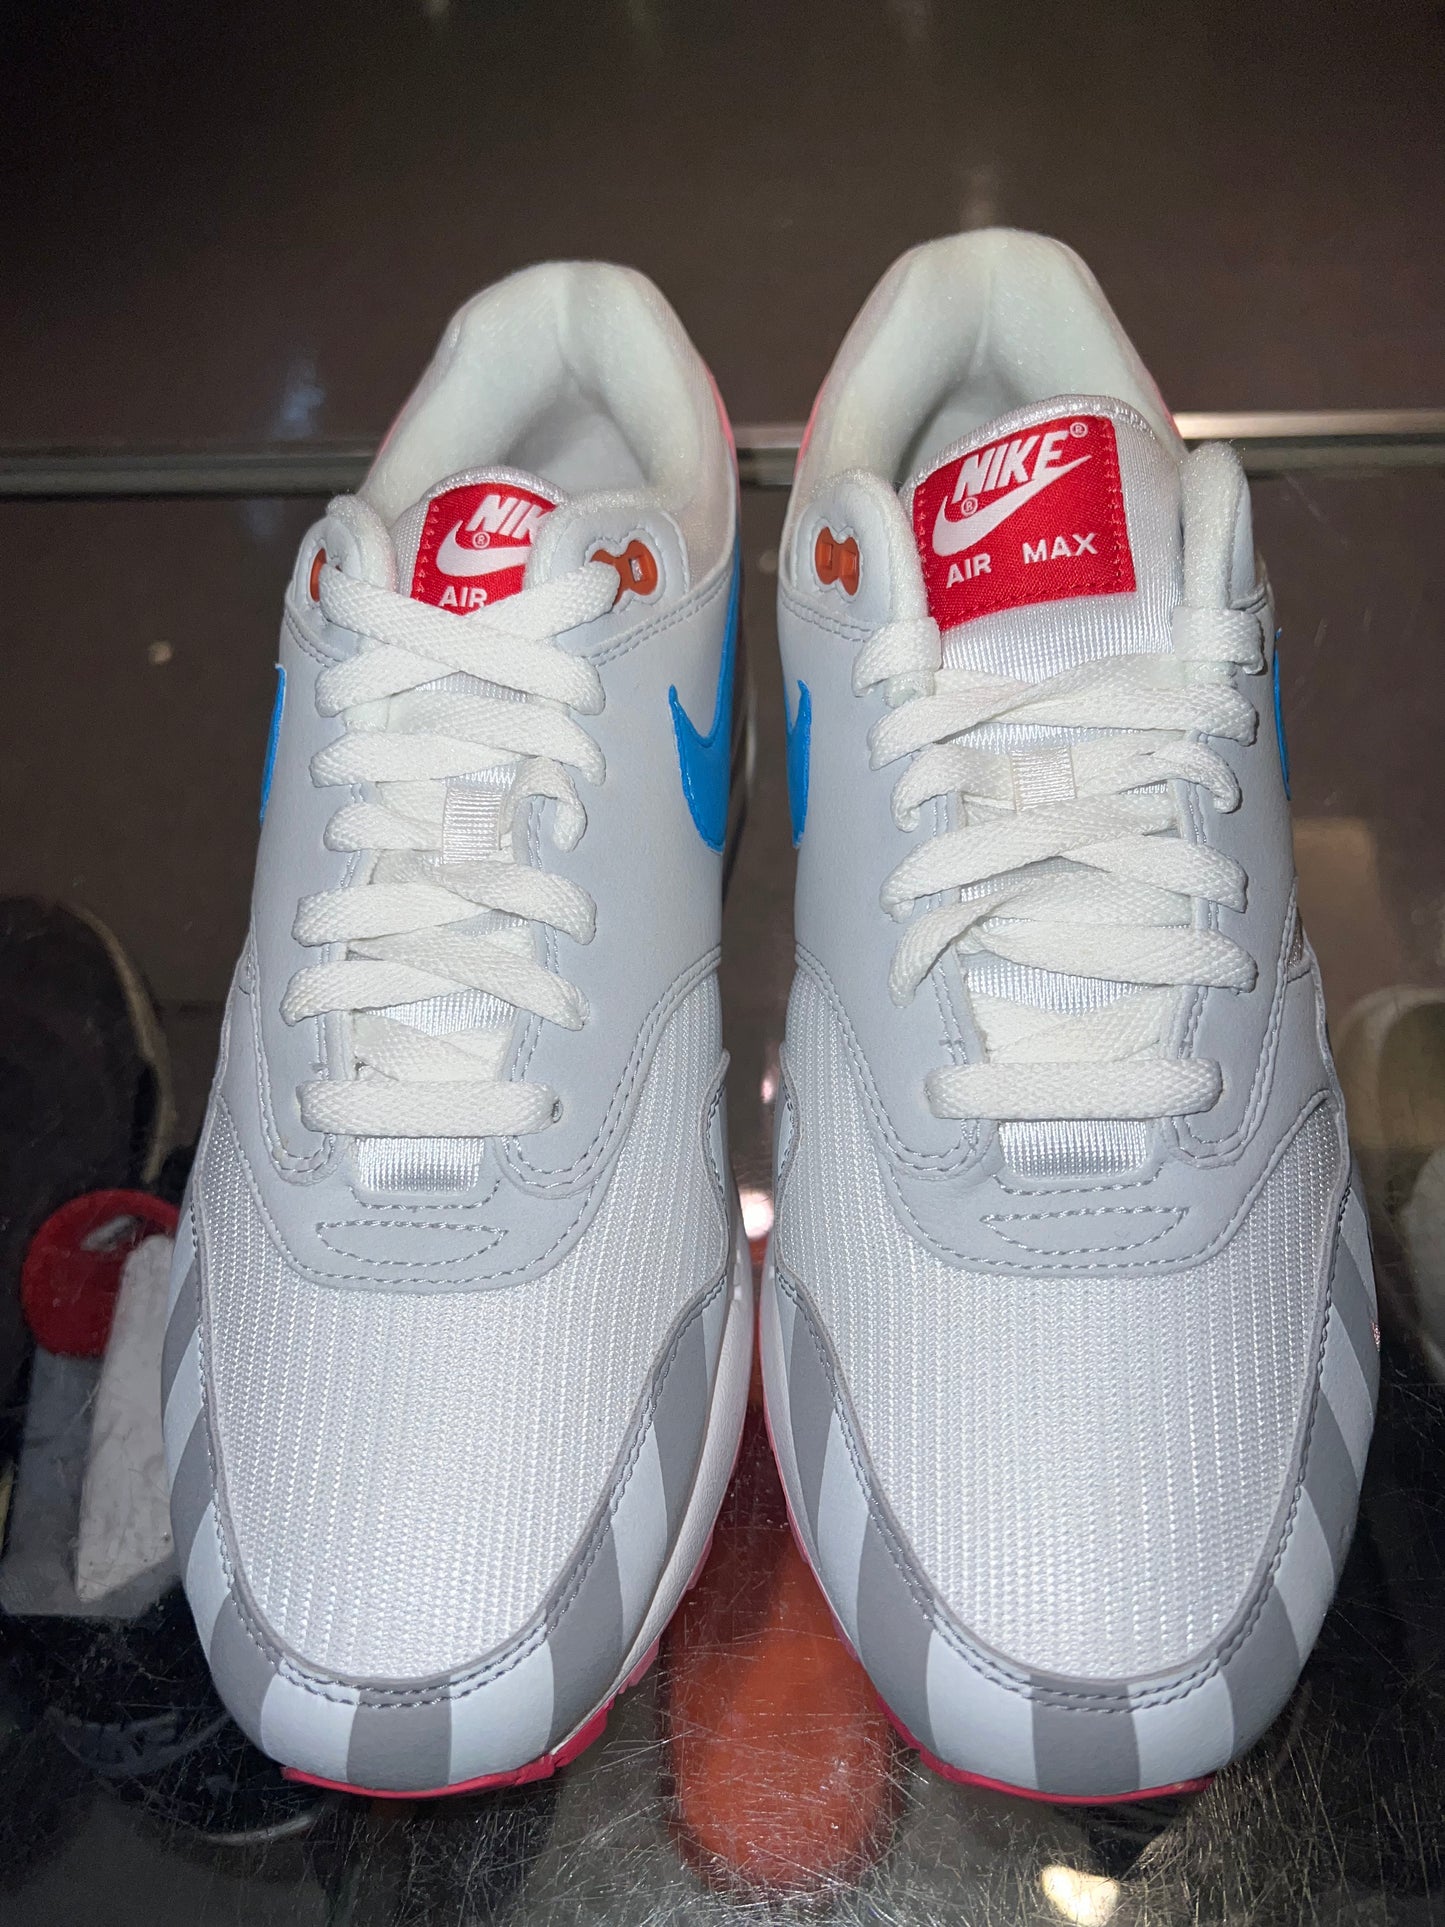 Size 9 Air Max 1 “Parra” Brand New (Mall)